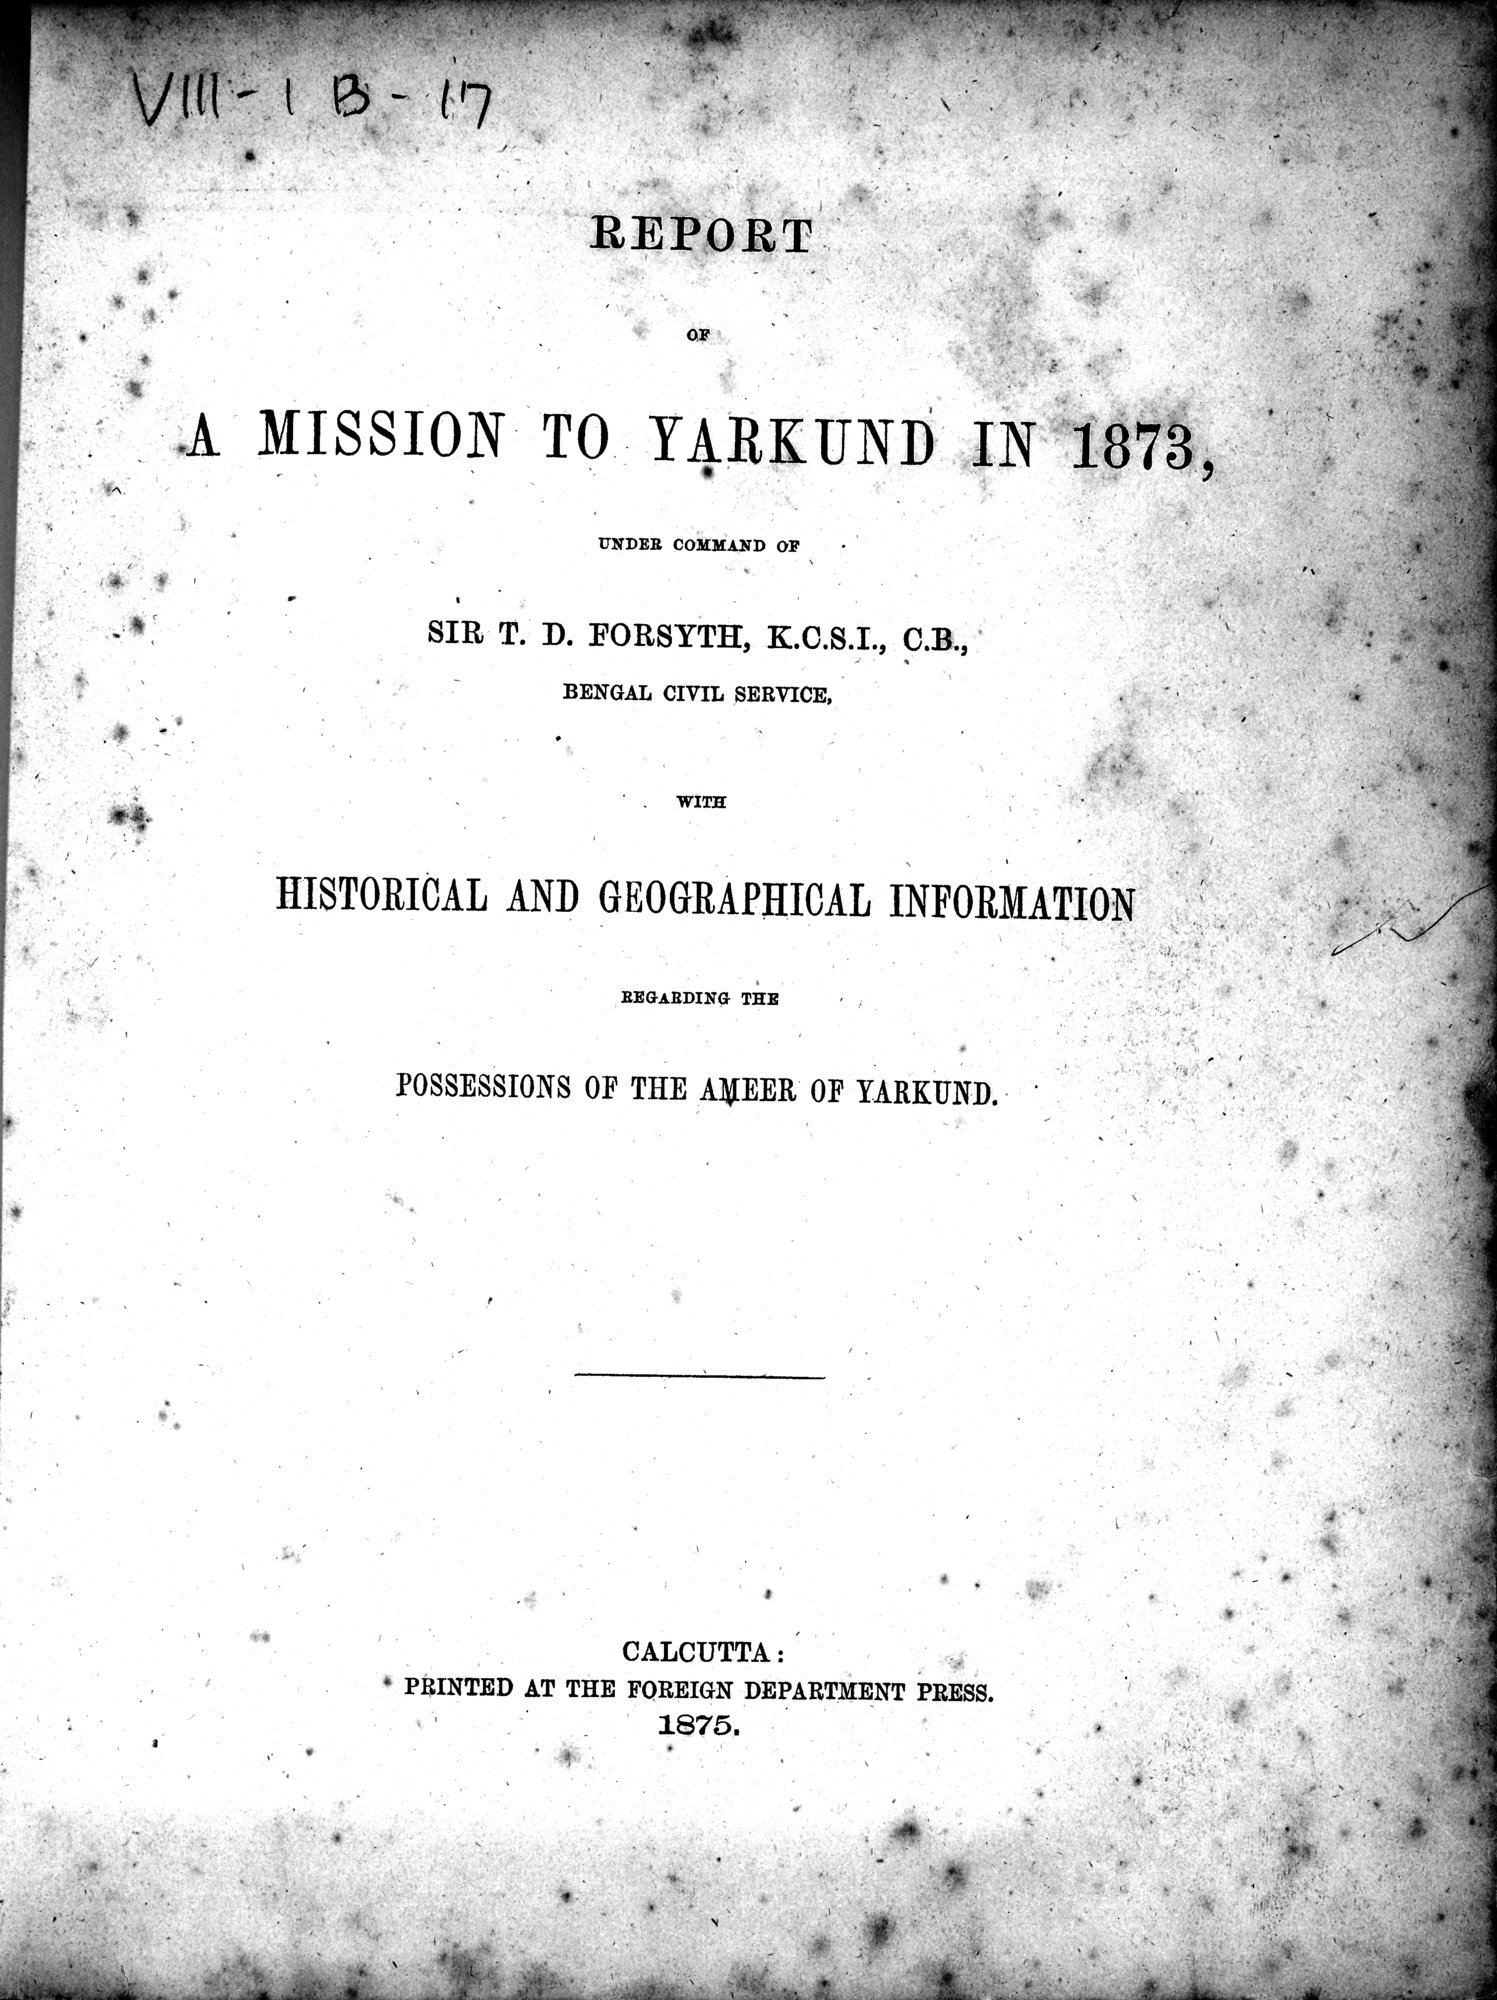 Report of a Mission to Yarkund in 1873 : vol.1 / 9 ページ（白黒高解像度画像）